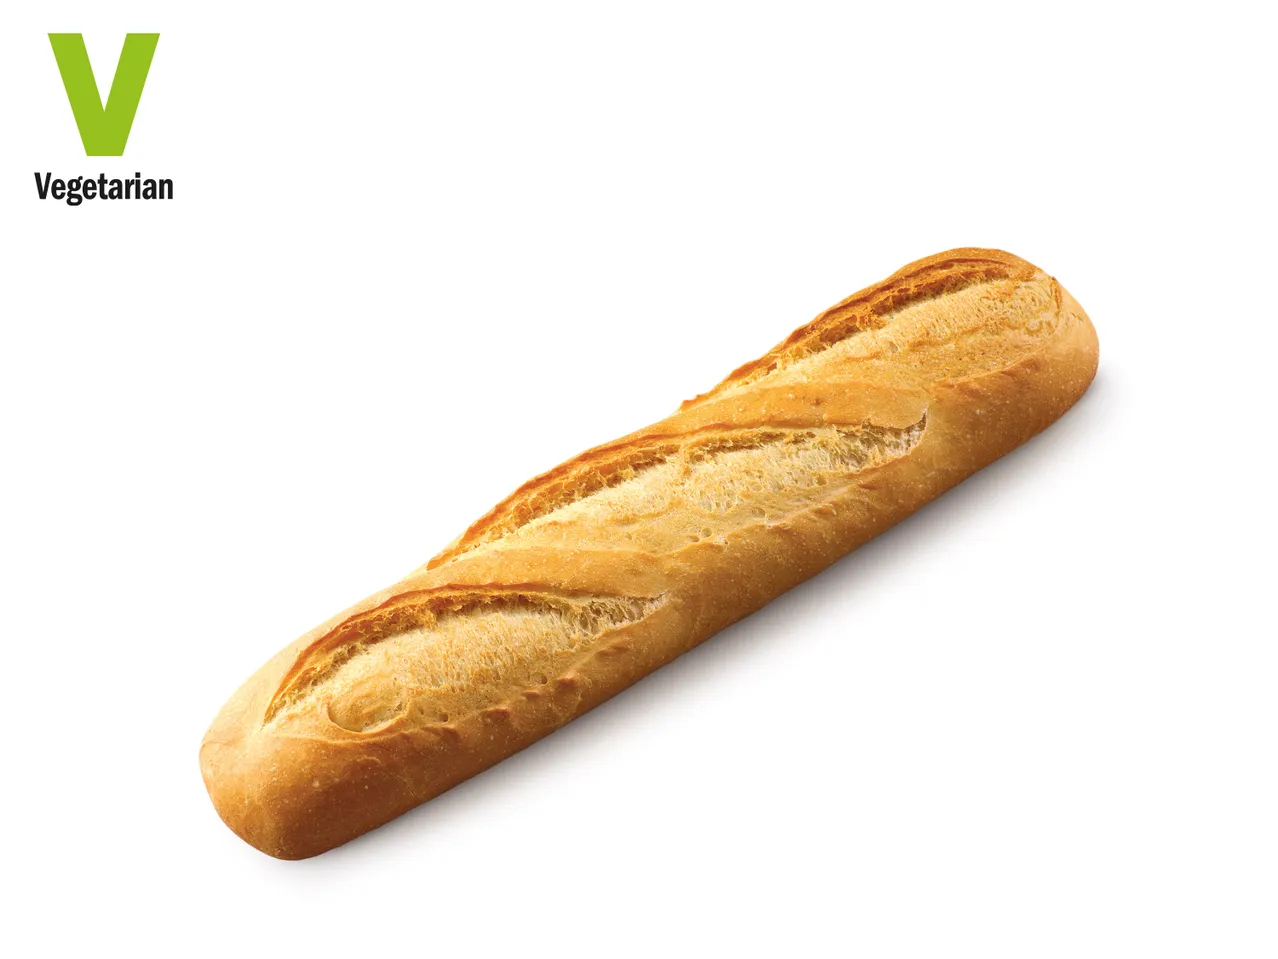 Go to full screen view: In-store Bakery Demi Baguette - Image 1